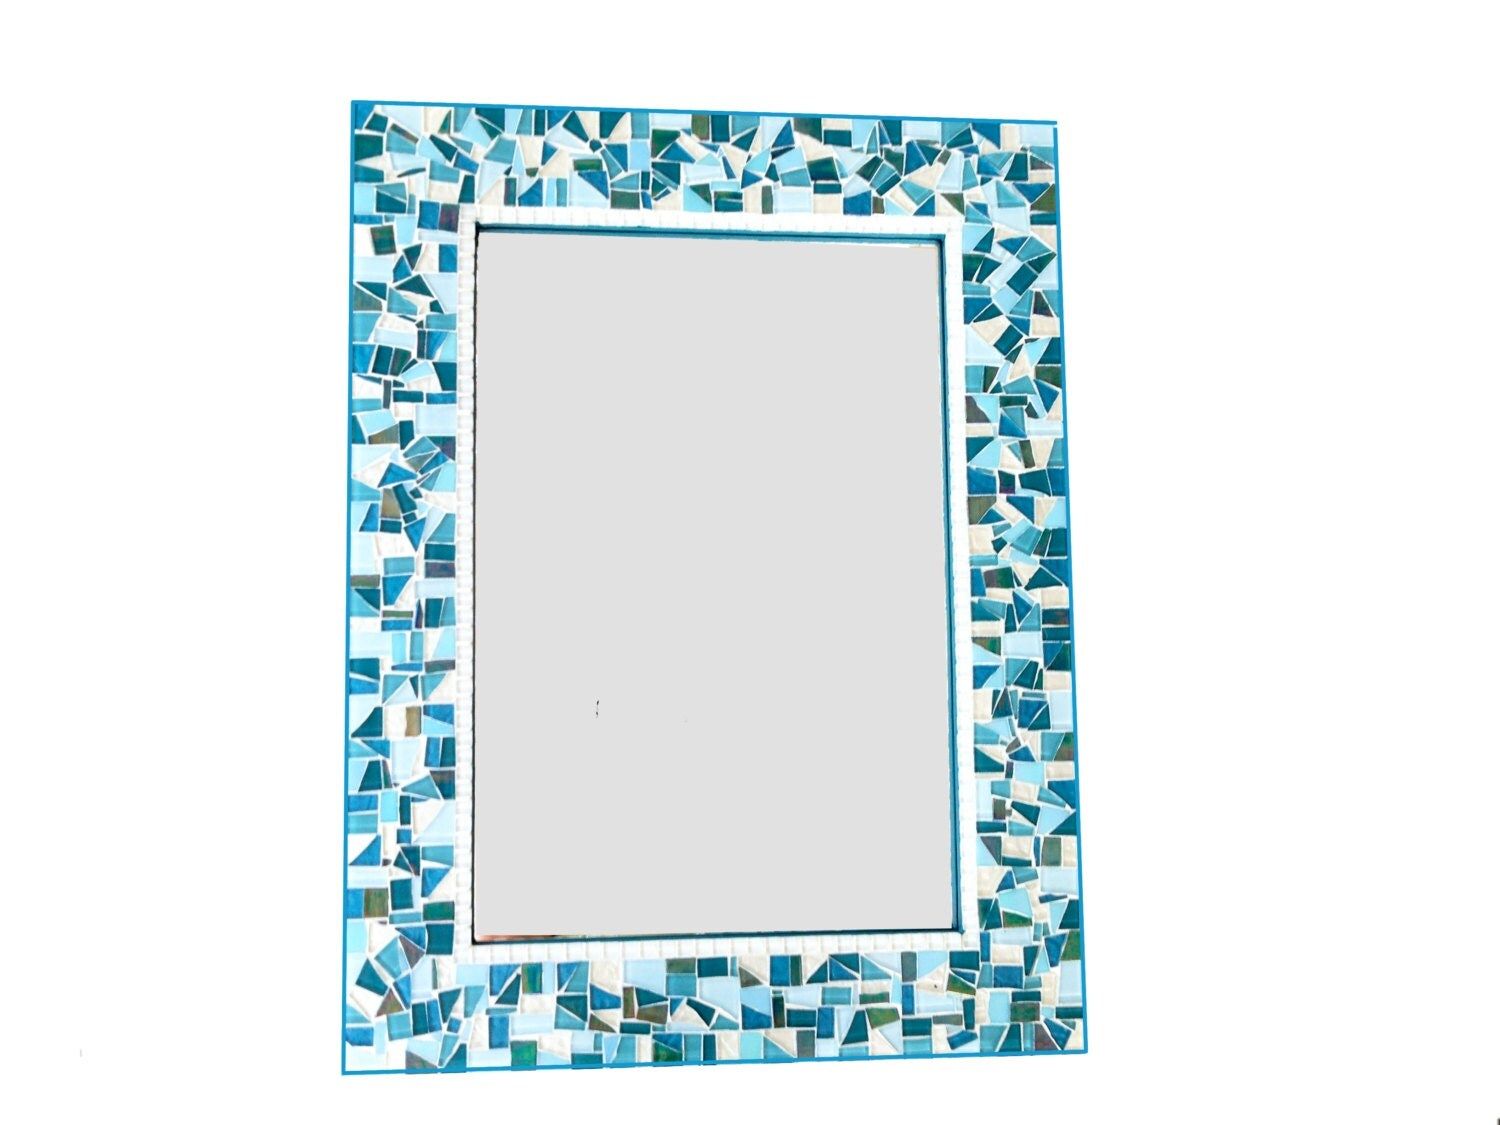 Turquoise Teal And Blue Large Mosaic Wall Mirror Intended For Blue Green Wall Mirrors (View 9 of 15)